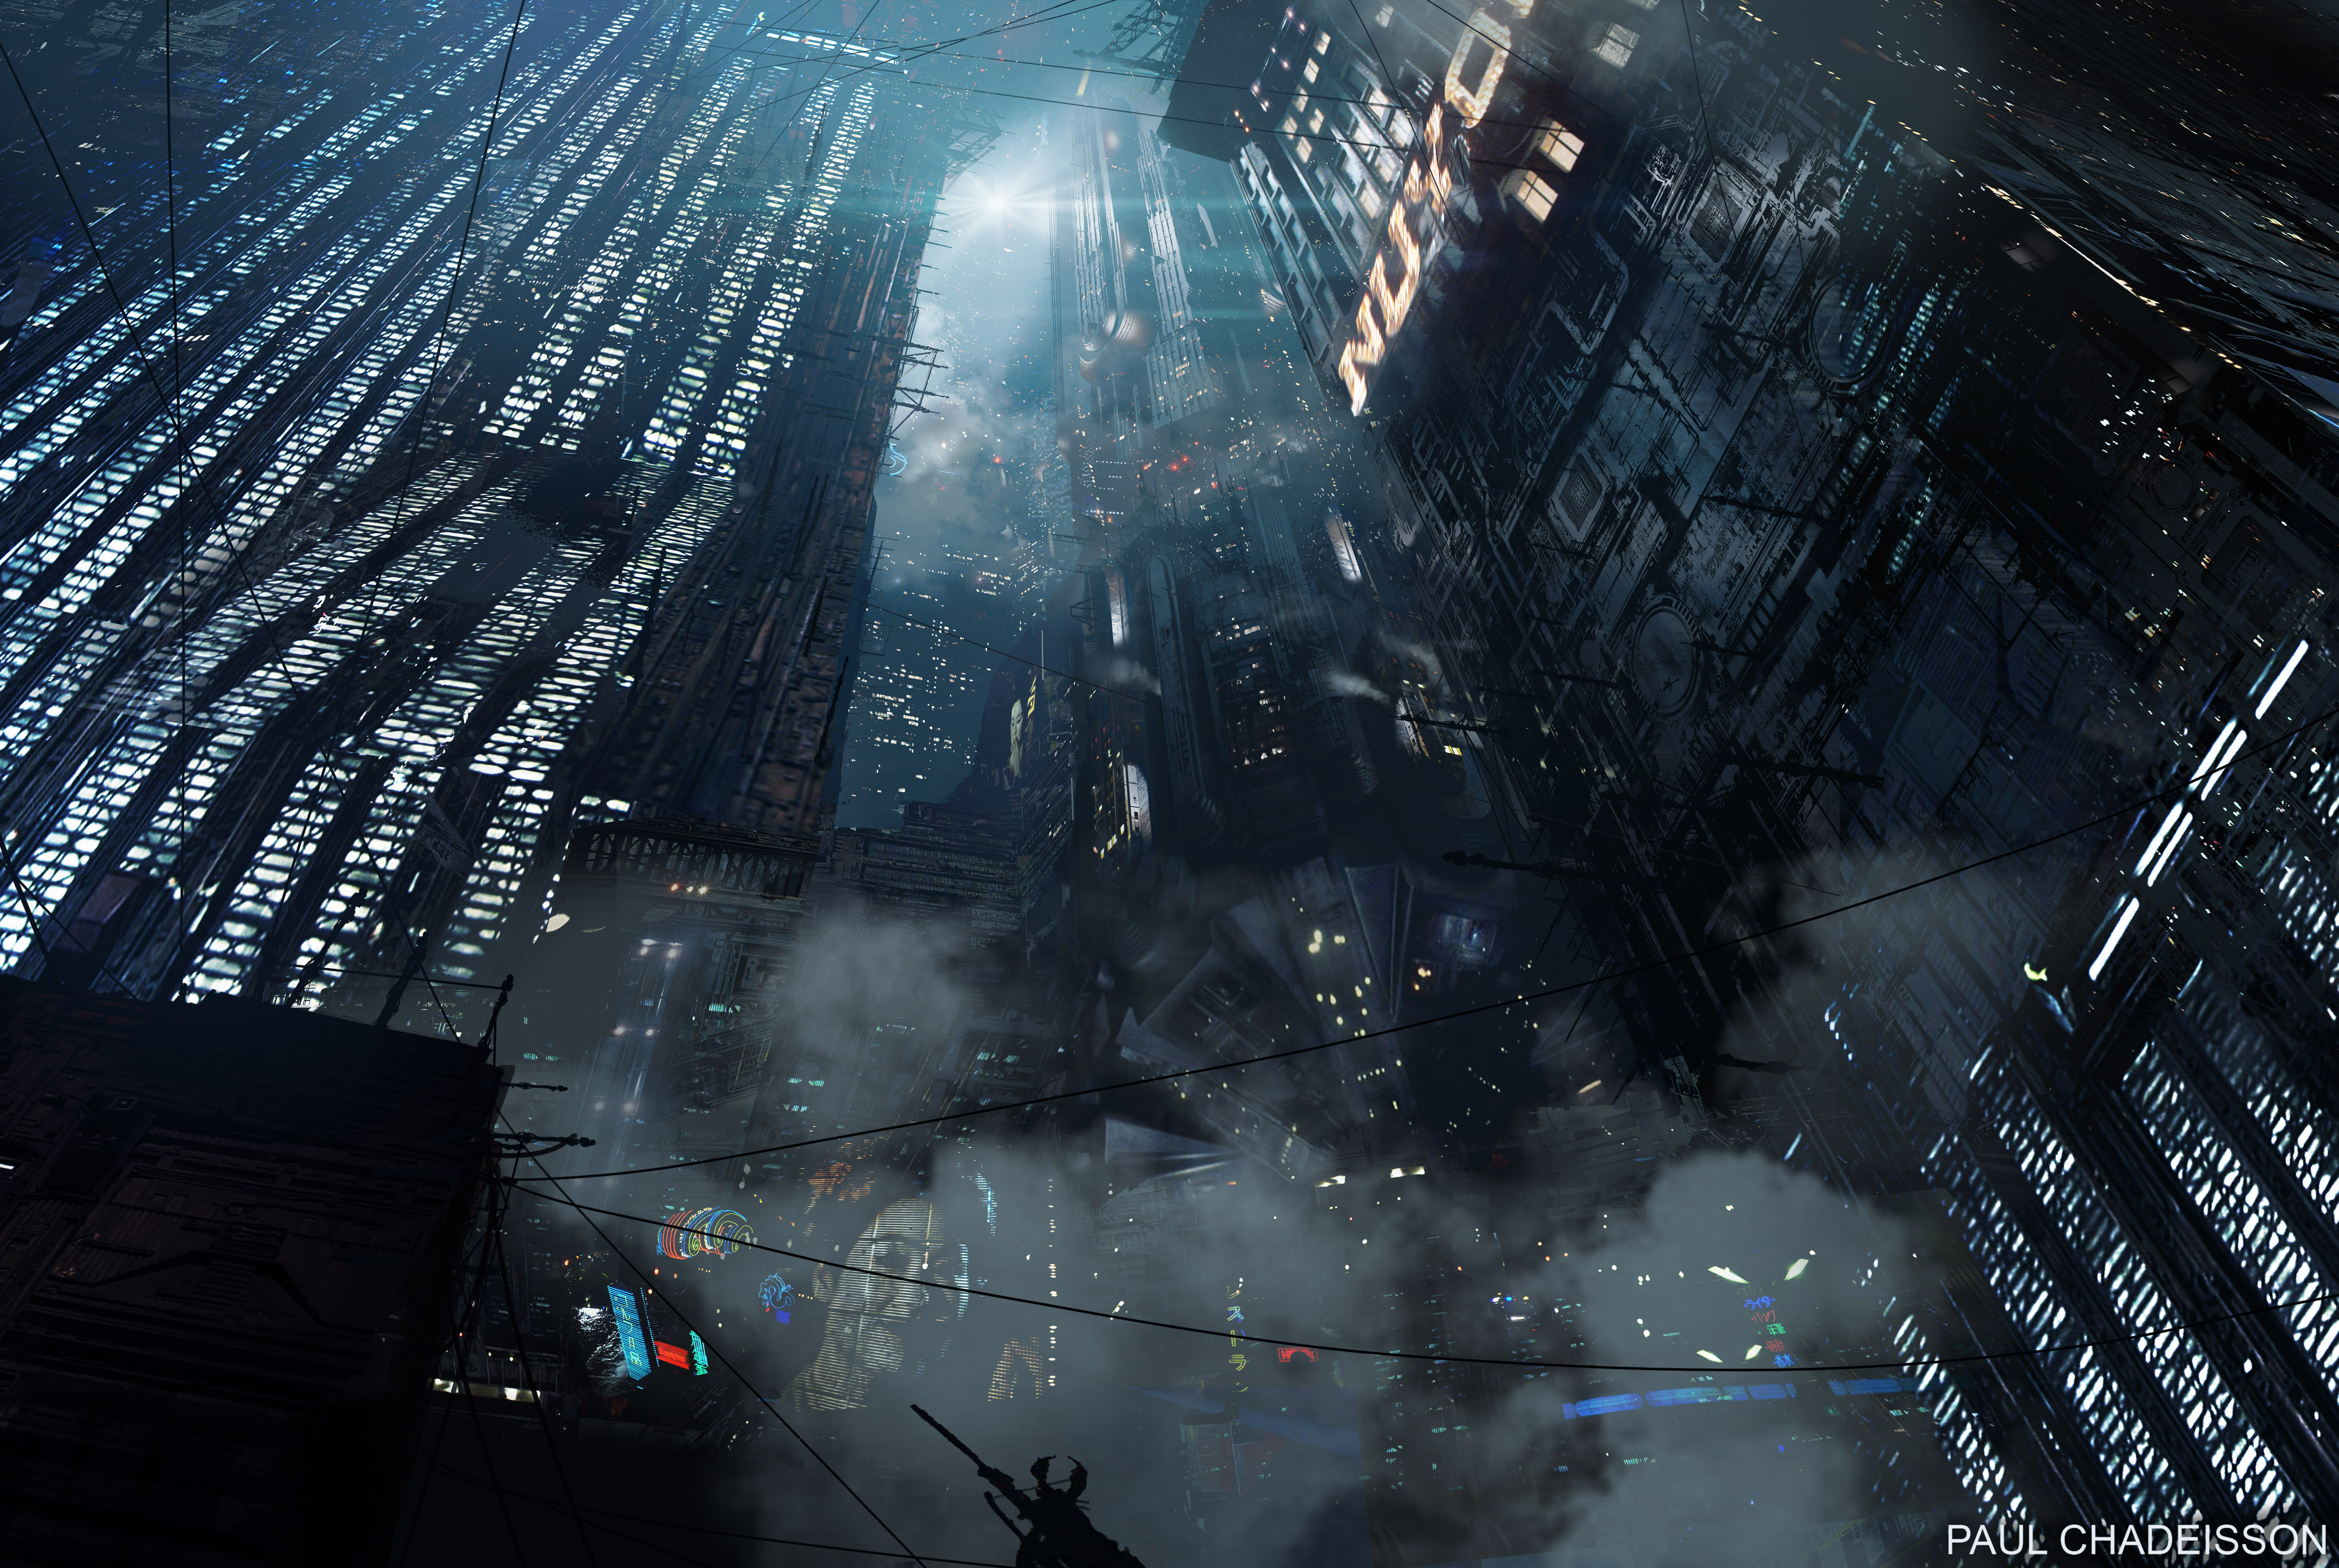 blade runner wallpaper,darkness,water,architecture,space,digital compositing